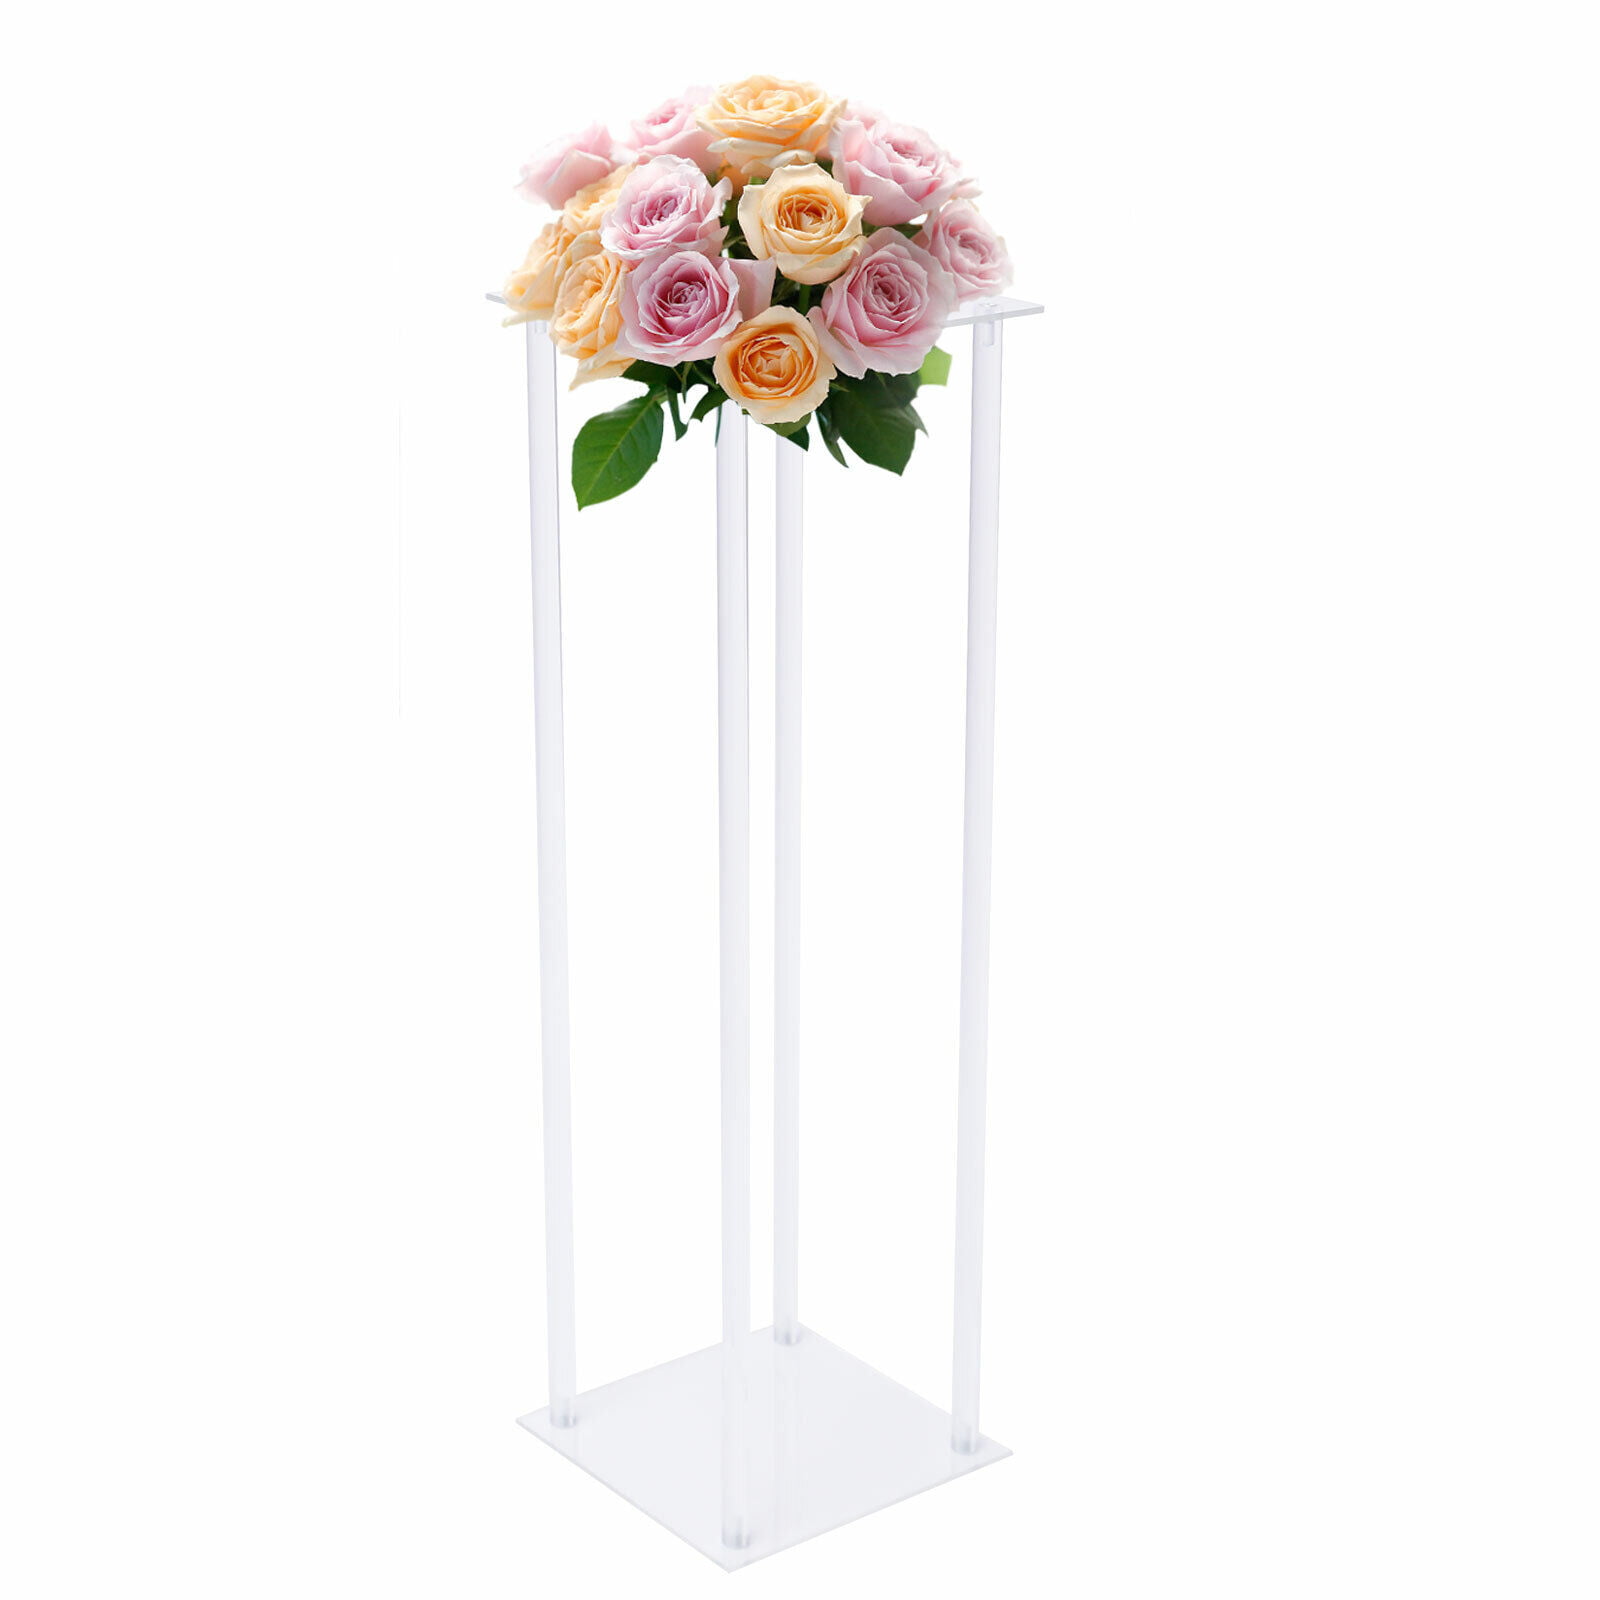 MIDUO Wedding Party CLear Flower Stand Acrylic Plant Pot Rack Column ...